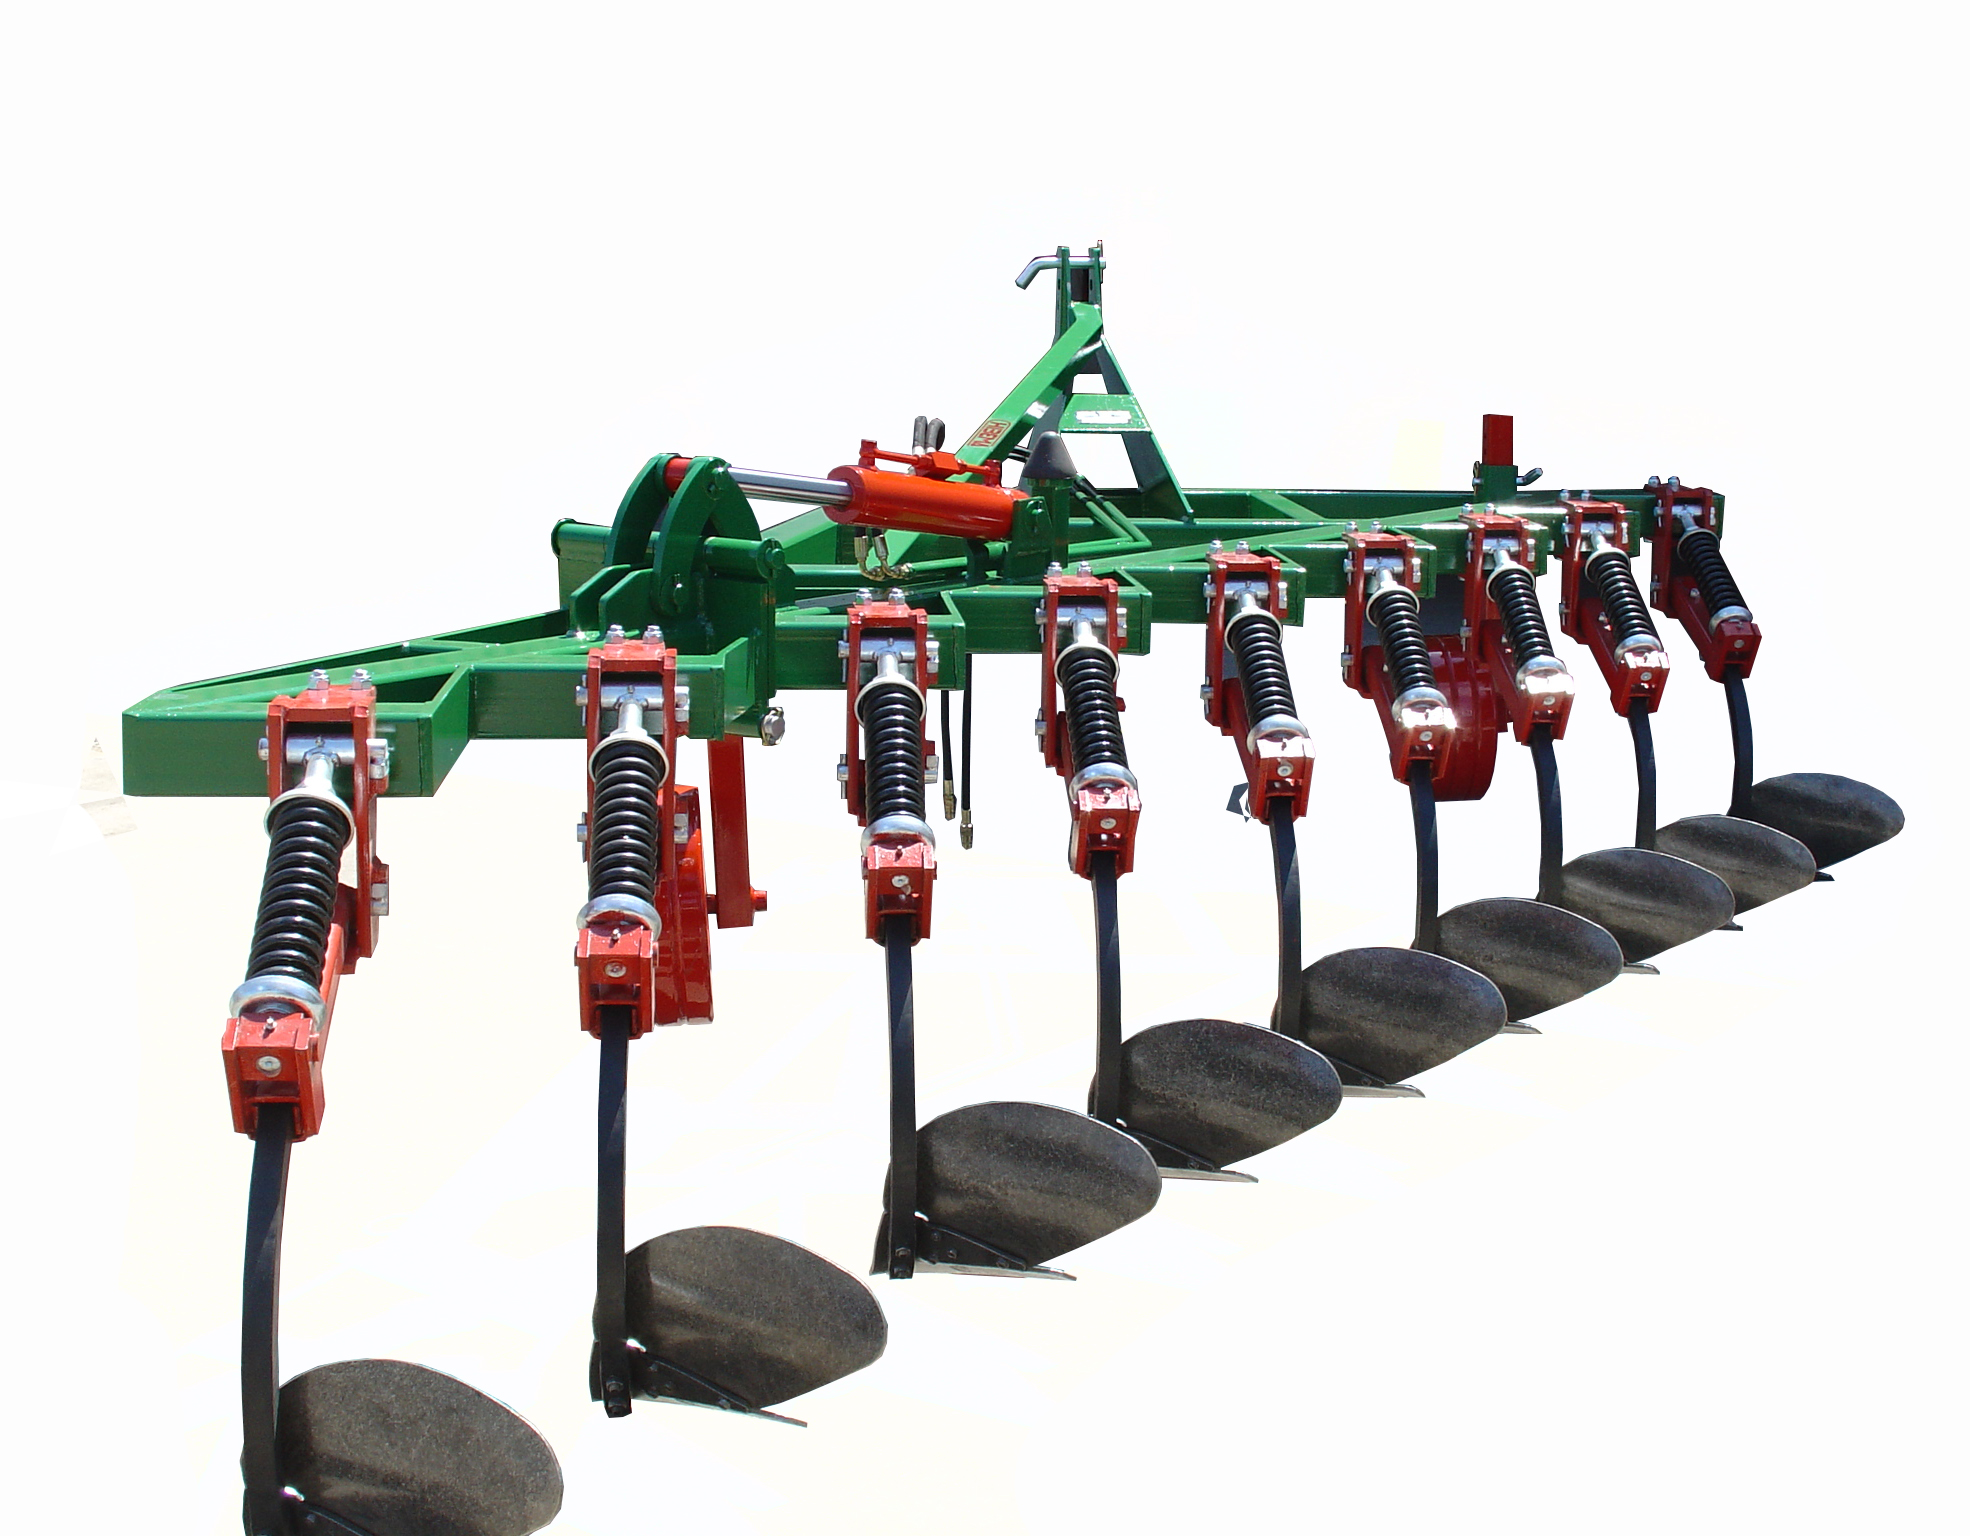 Fixed ploughs